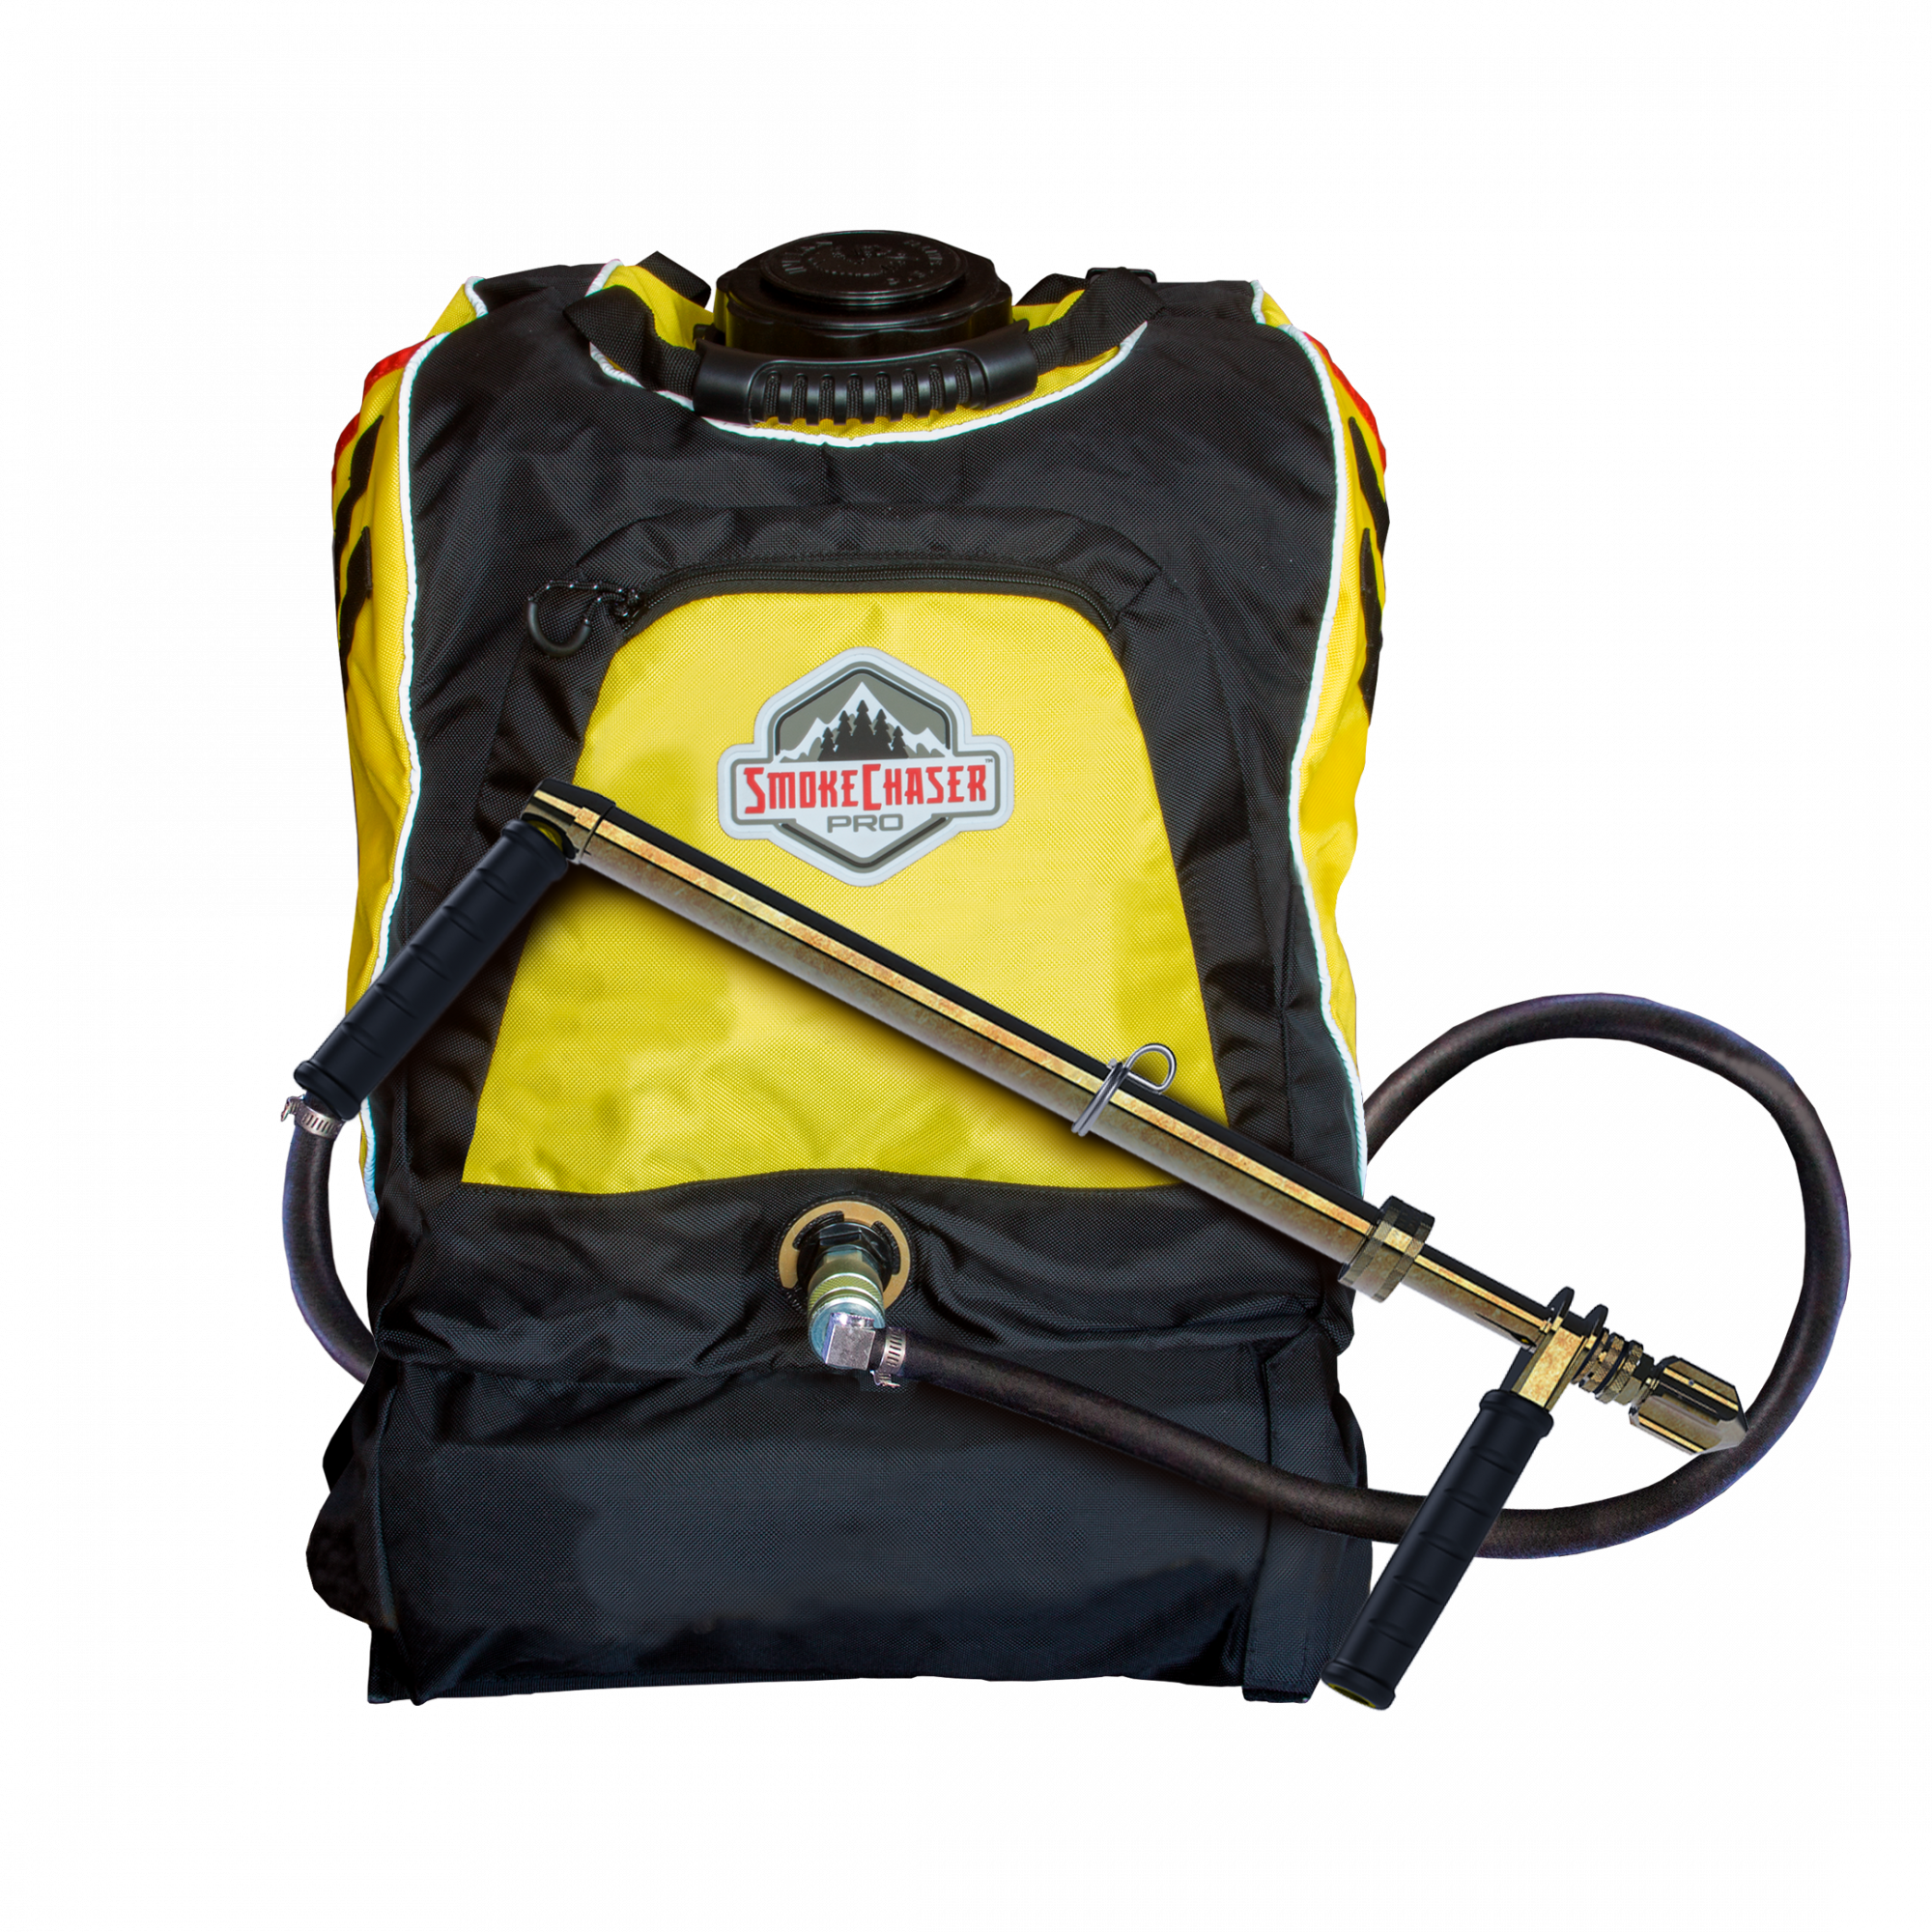 Indian SmokeChaser™ Pro Backpack with FP300 Dual Action Fire Pump, Model 190654